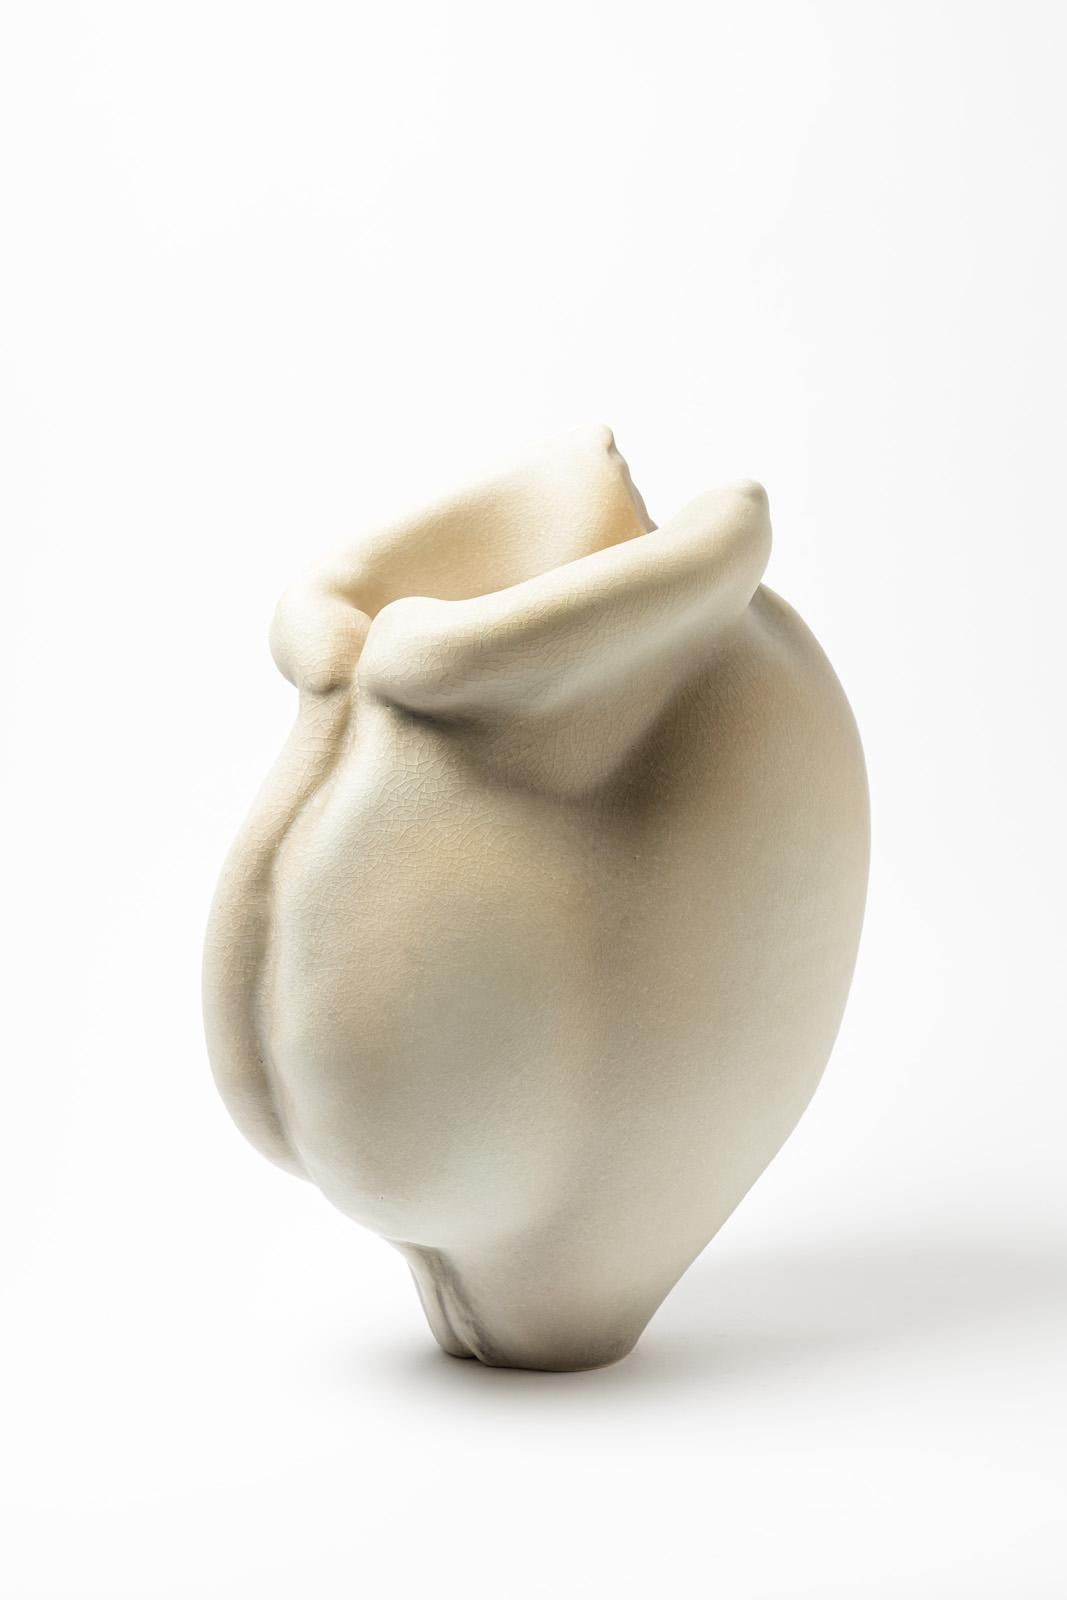 A porcelain sculpture by Wayne Fischer.
Perfect original conditions.
Signed.
Unique piece.
2015.

How can an inert object produce deeply unsuspecting, indecipherable, uncontrollable emotions?
Wayne Fischer is an artist who can create works that